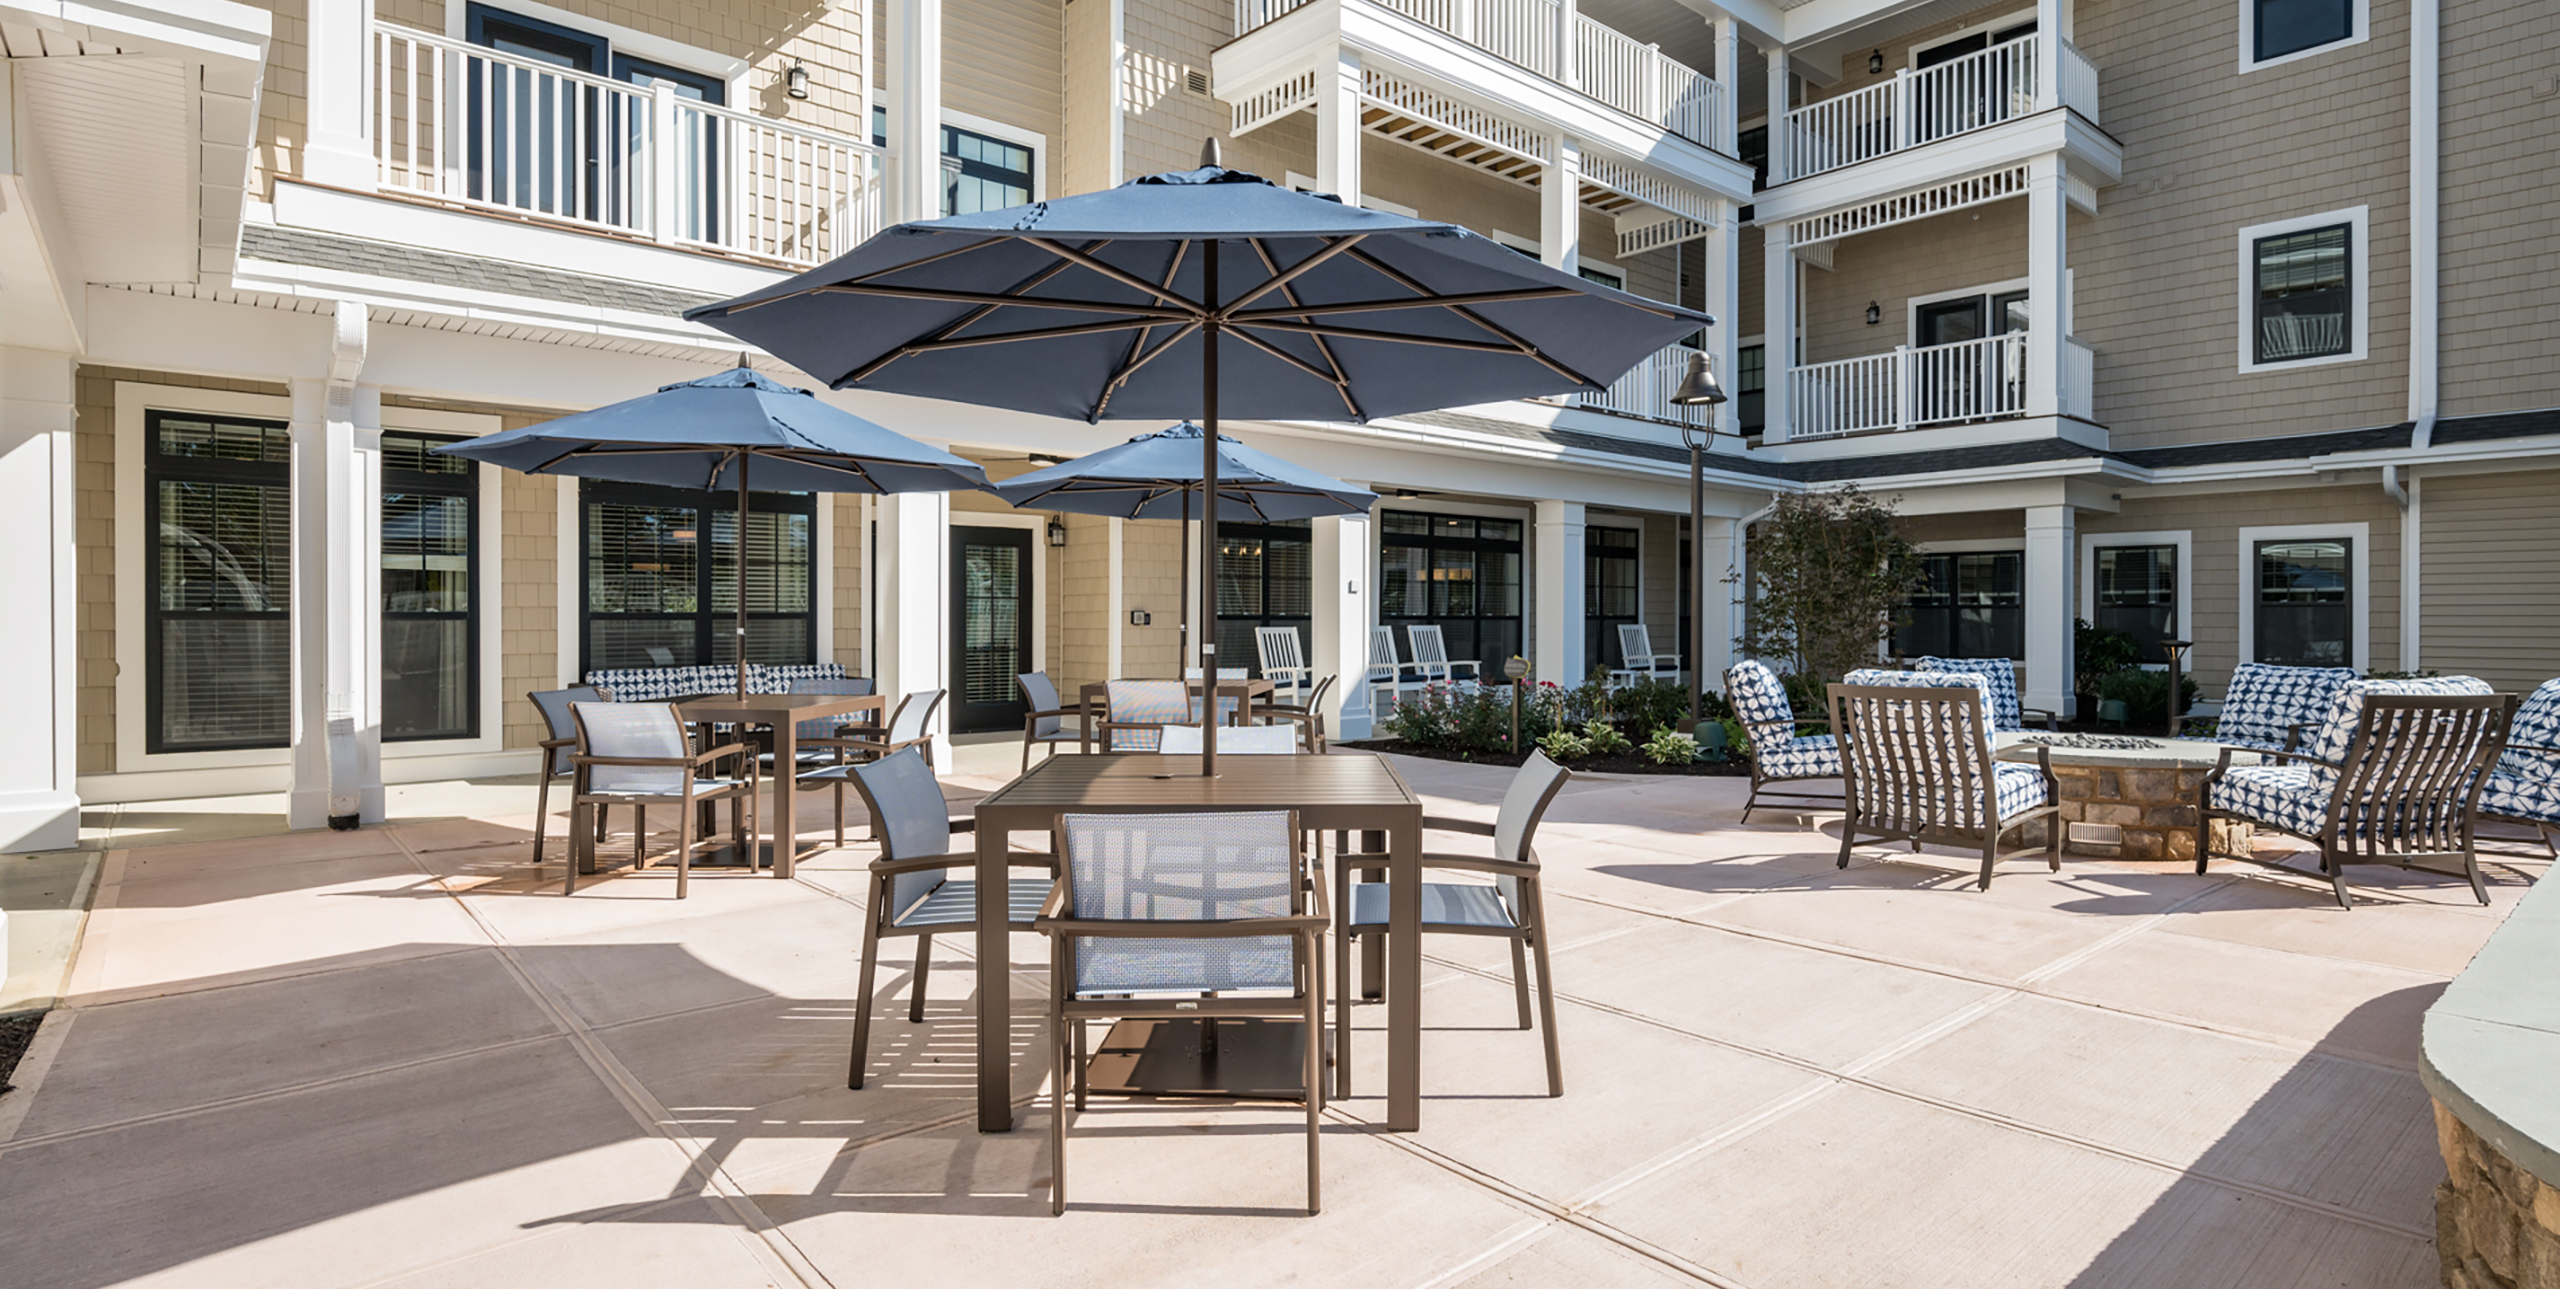 Outdoor patio with chairs, tables, and umbrellas and fireplaces at Brightview Senior Living Port Jeff